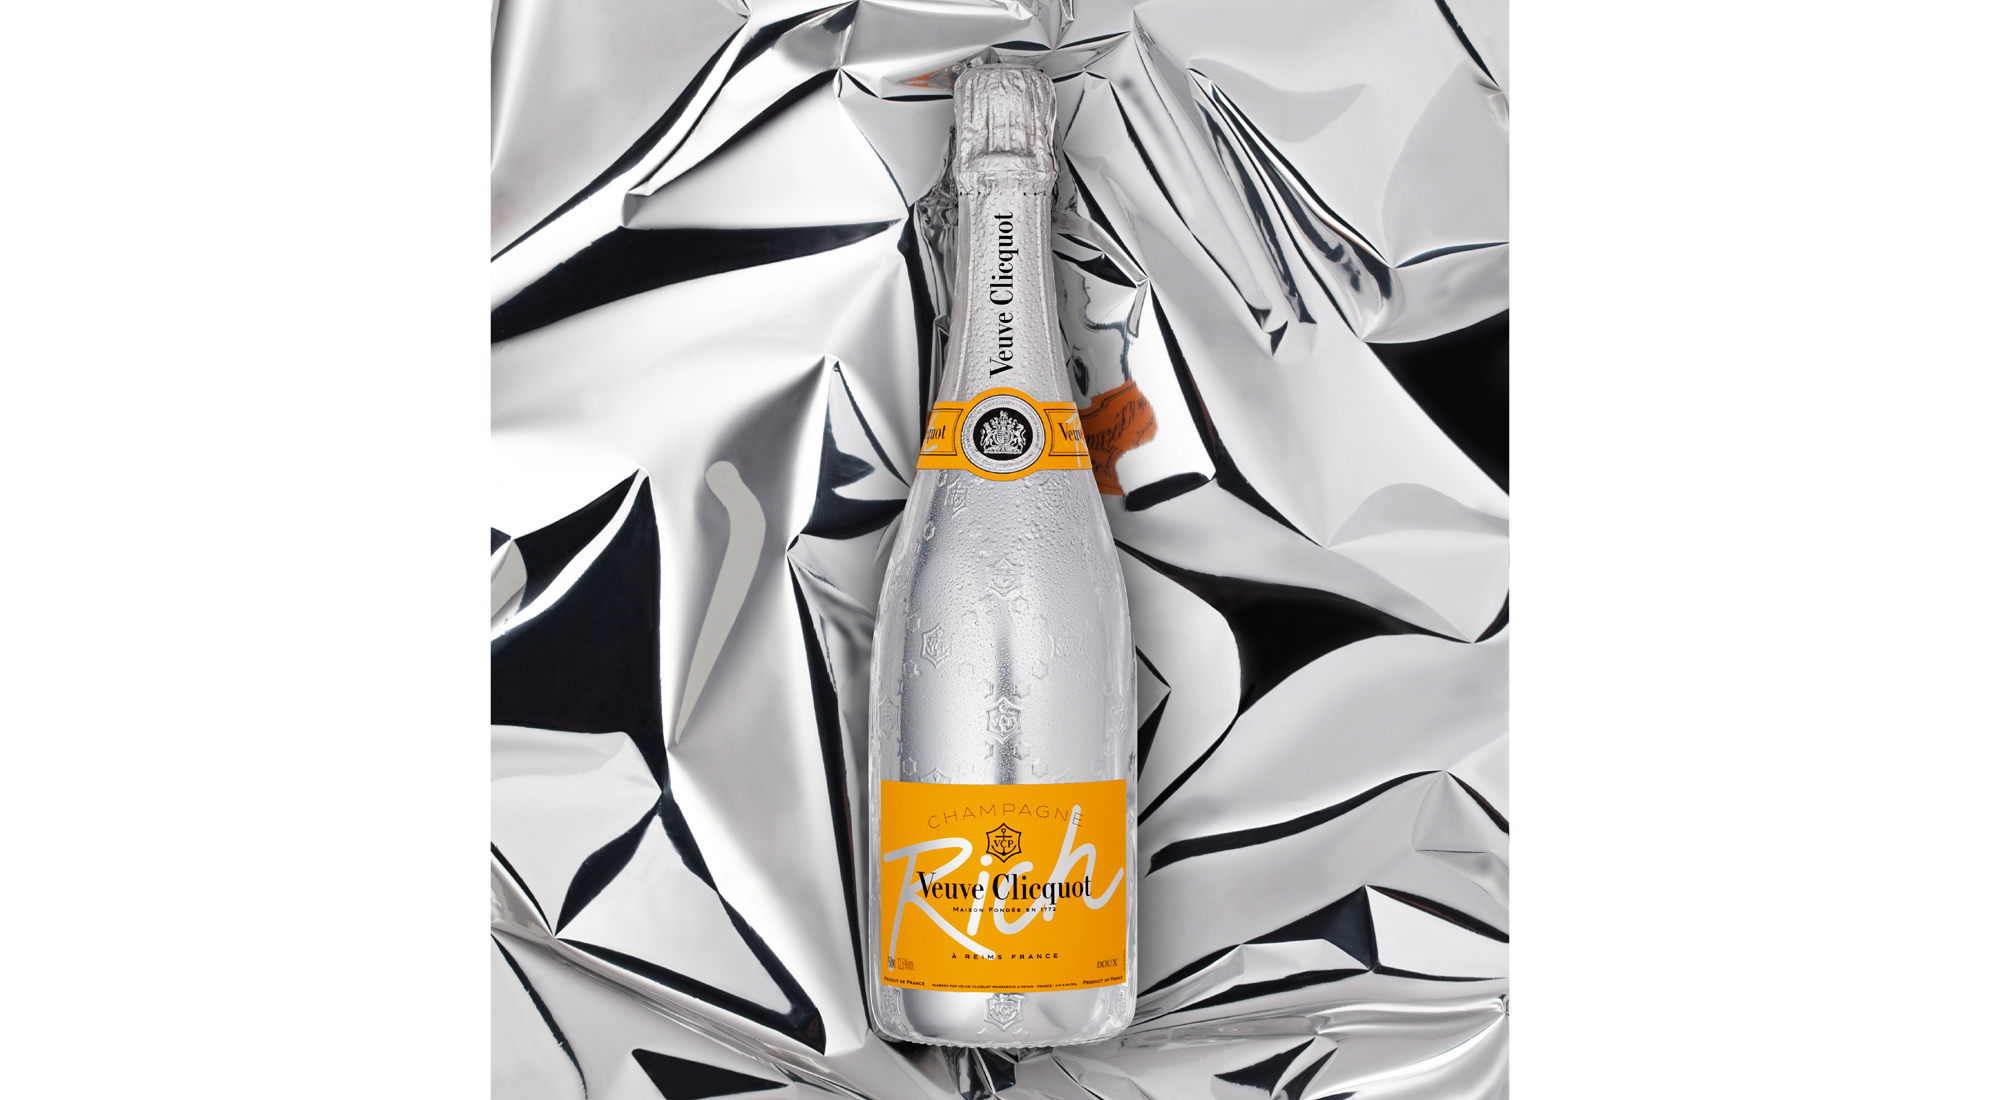 Veuve Clicquot Rich Champagne - Blackwell's Wines & Spirits